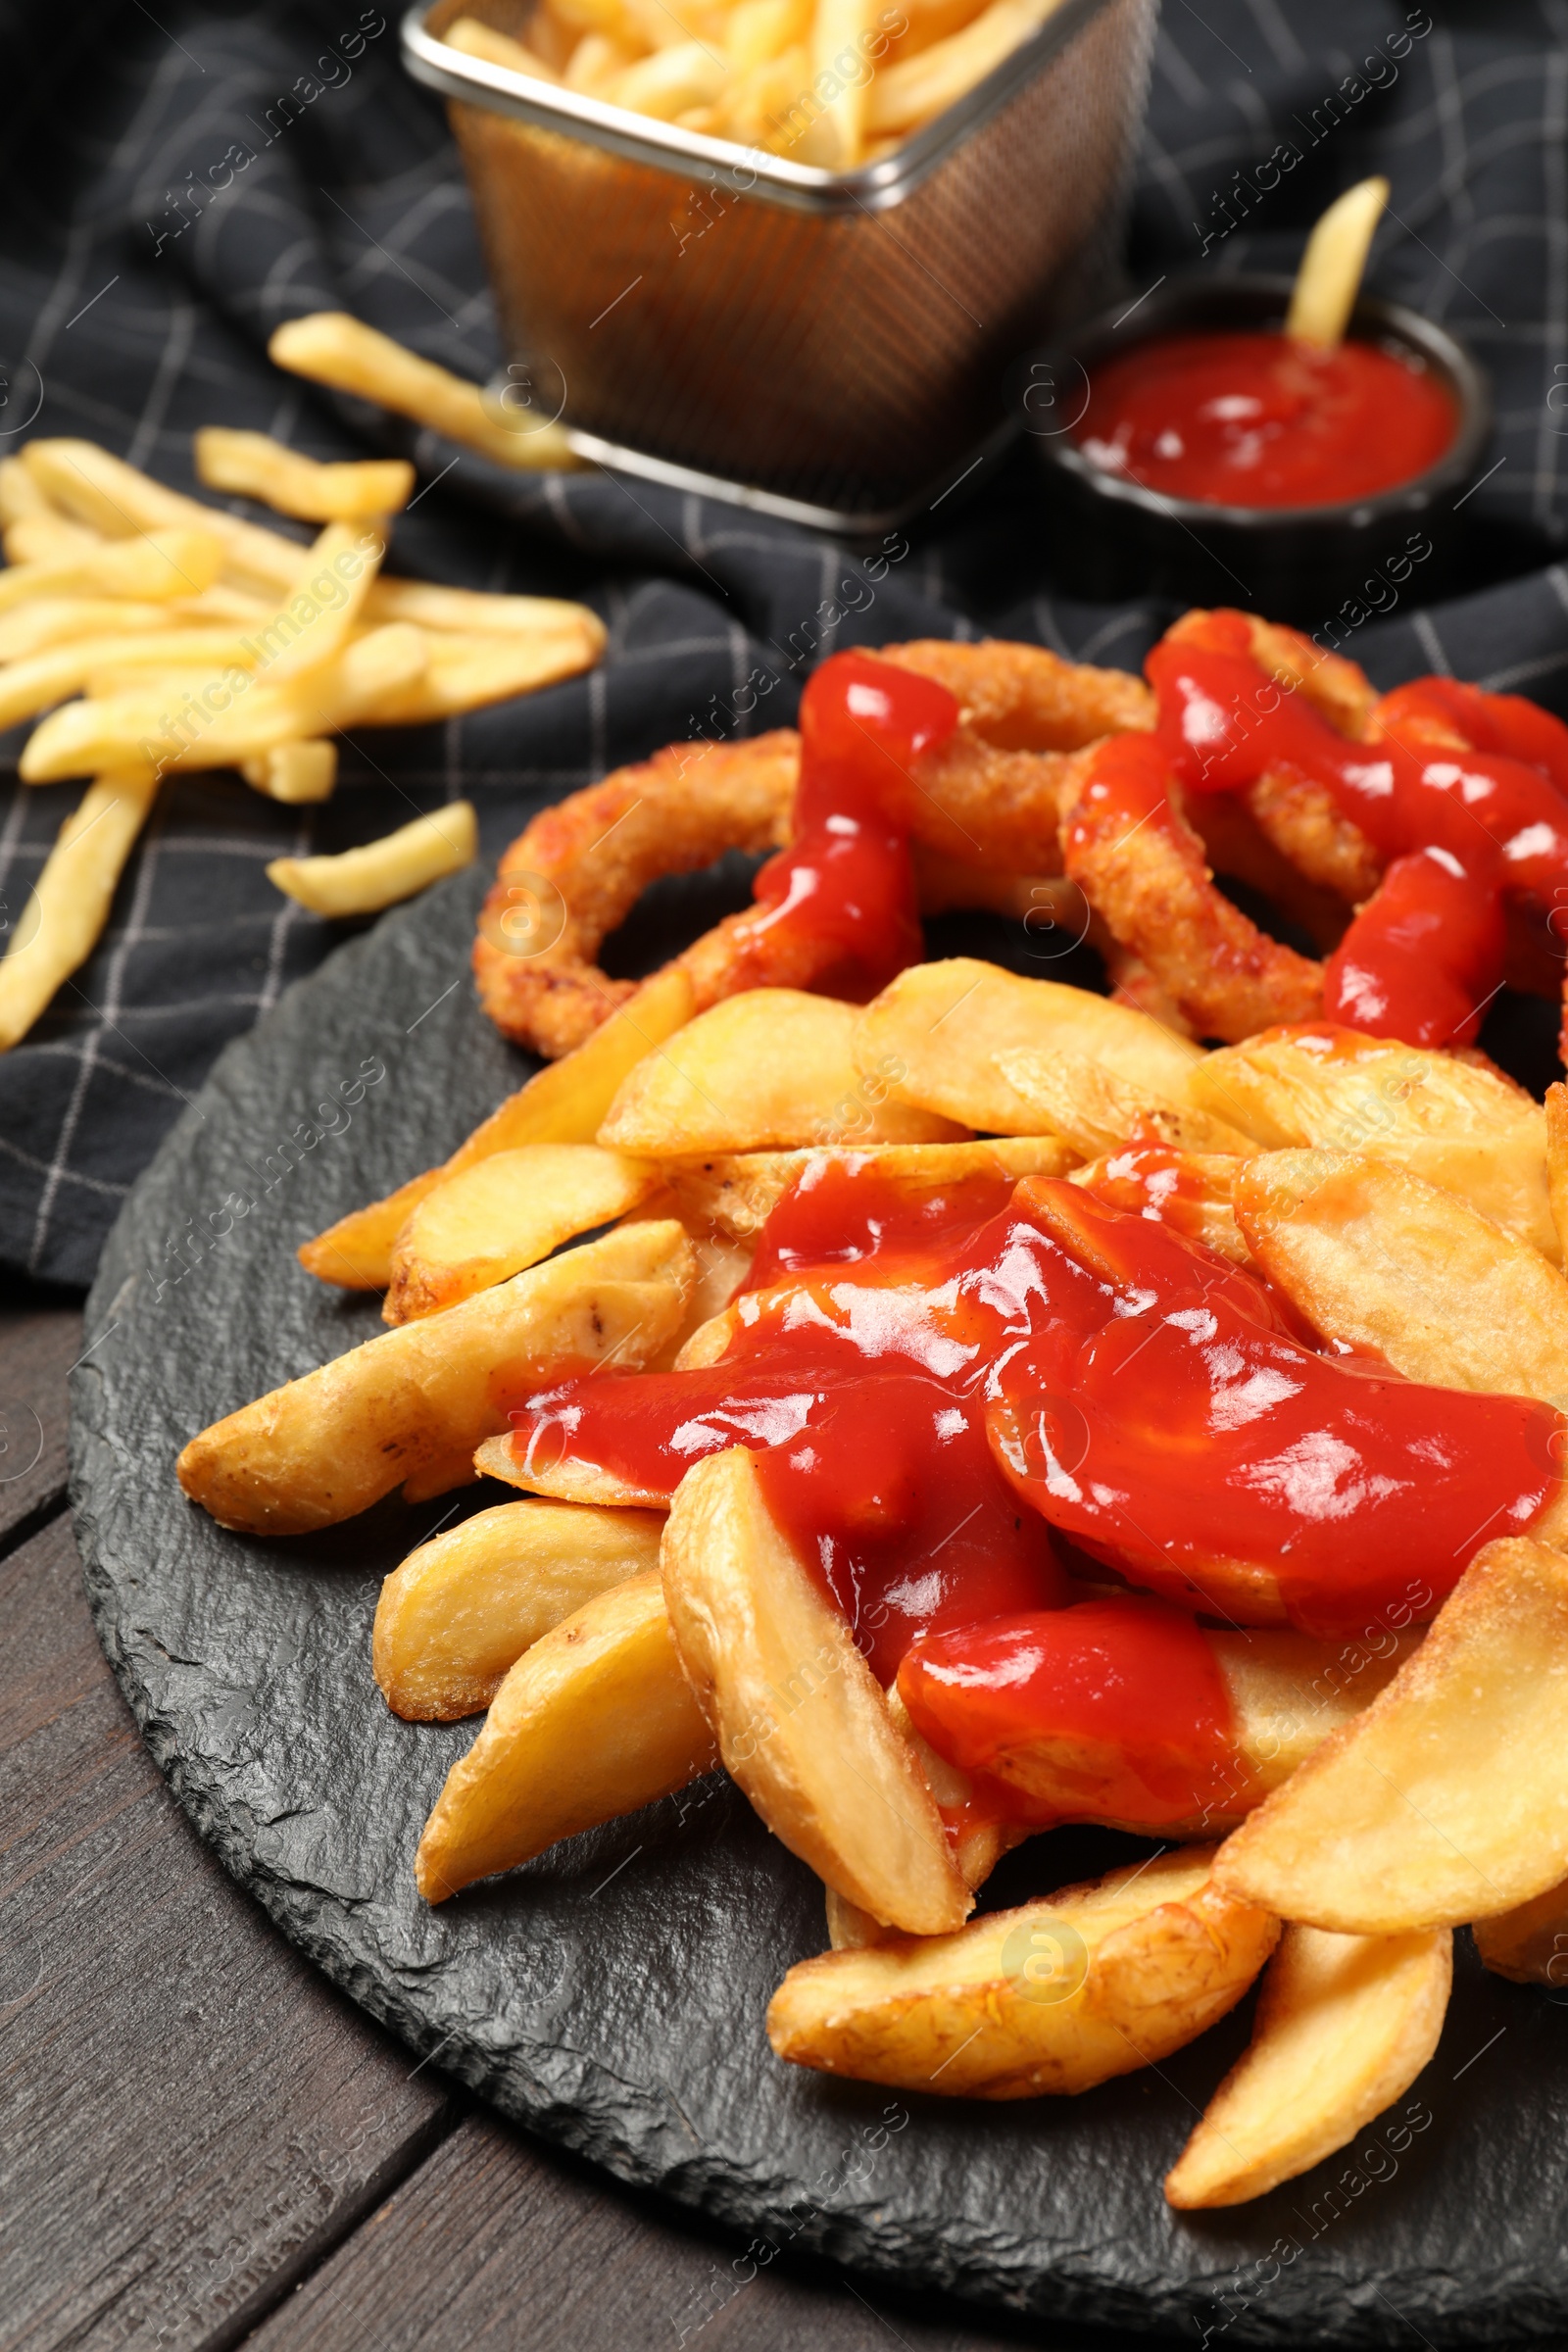 Photo of Delicious baked potato and onion rings with ketchup on table, closeup